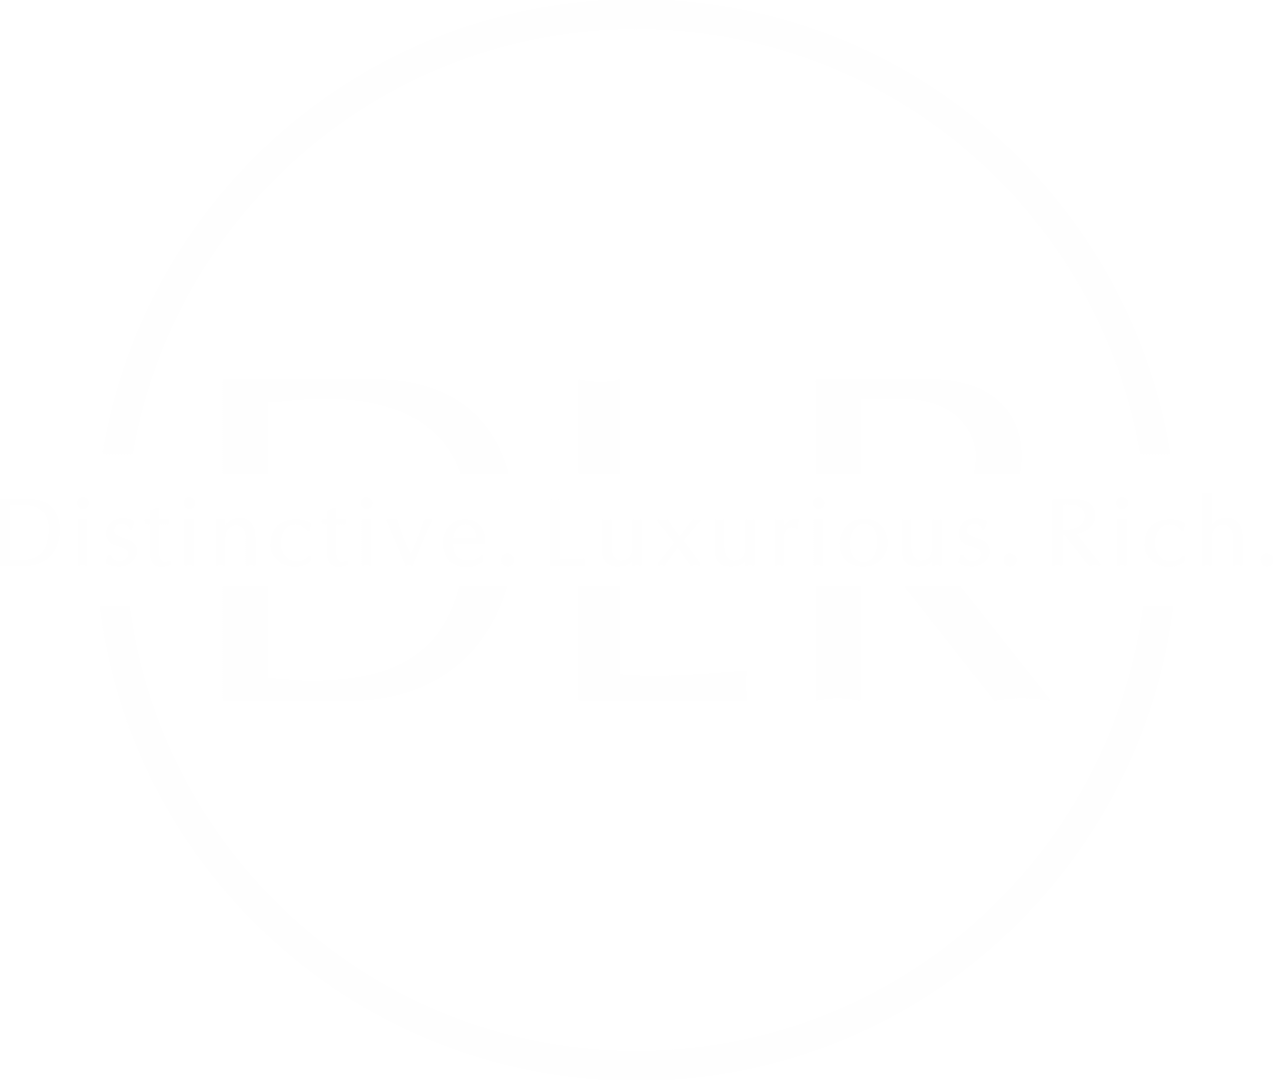 A green background with white letters that say " distinctive. Luxurious. Rich ".